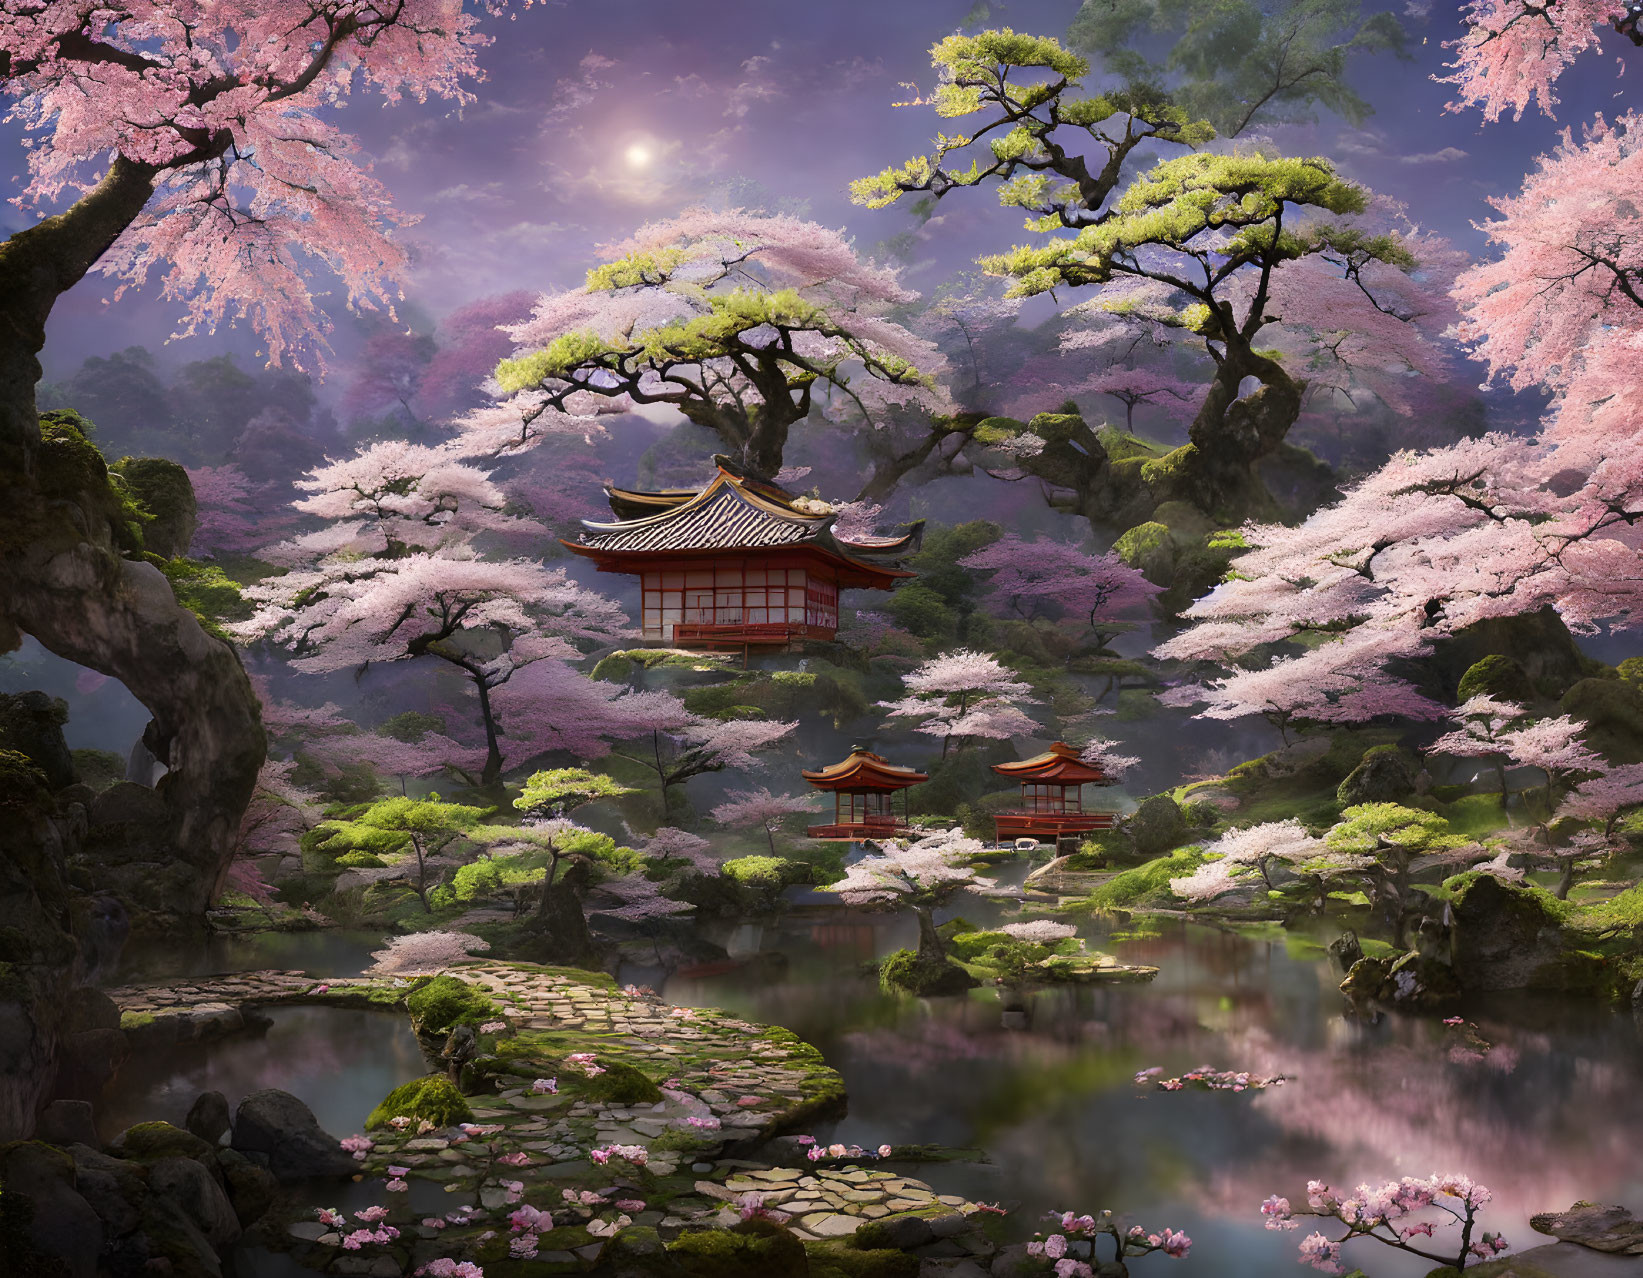 Traditional Japanese garden with cherry blossoms, pagoda, pond, and lush greenery.